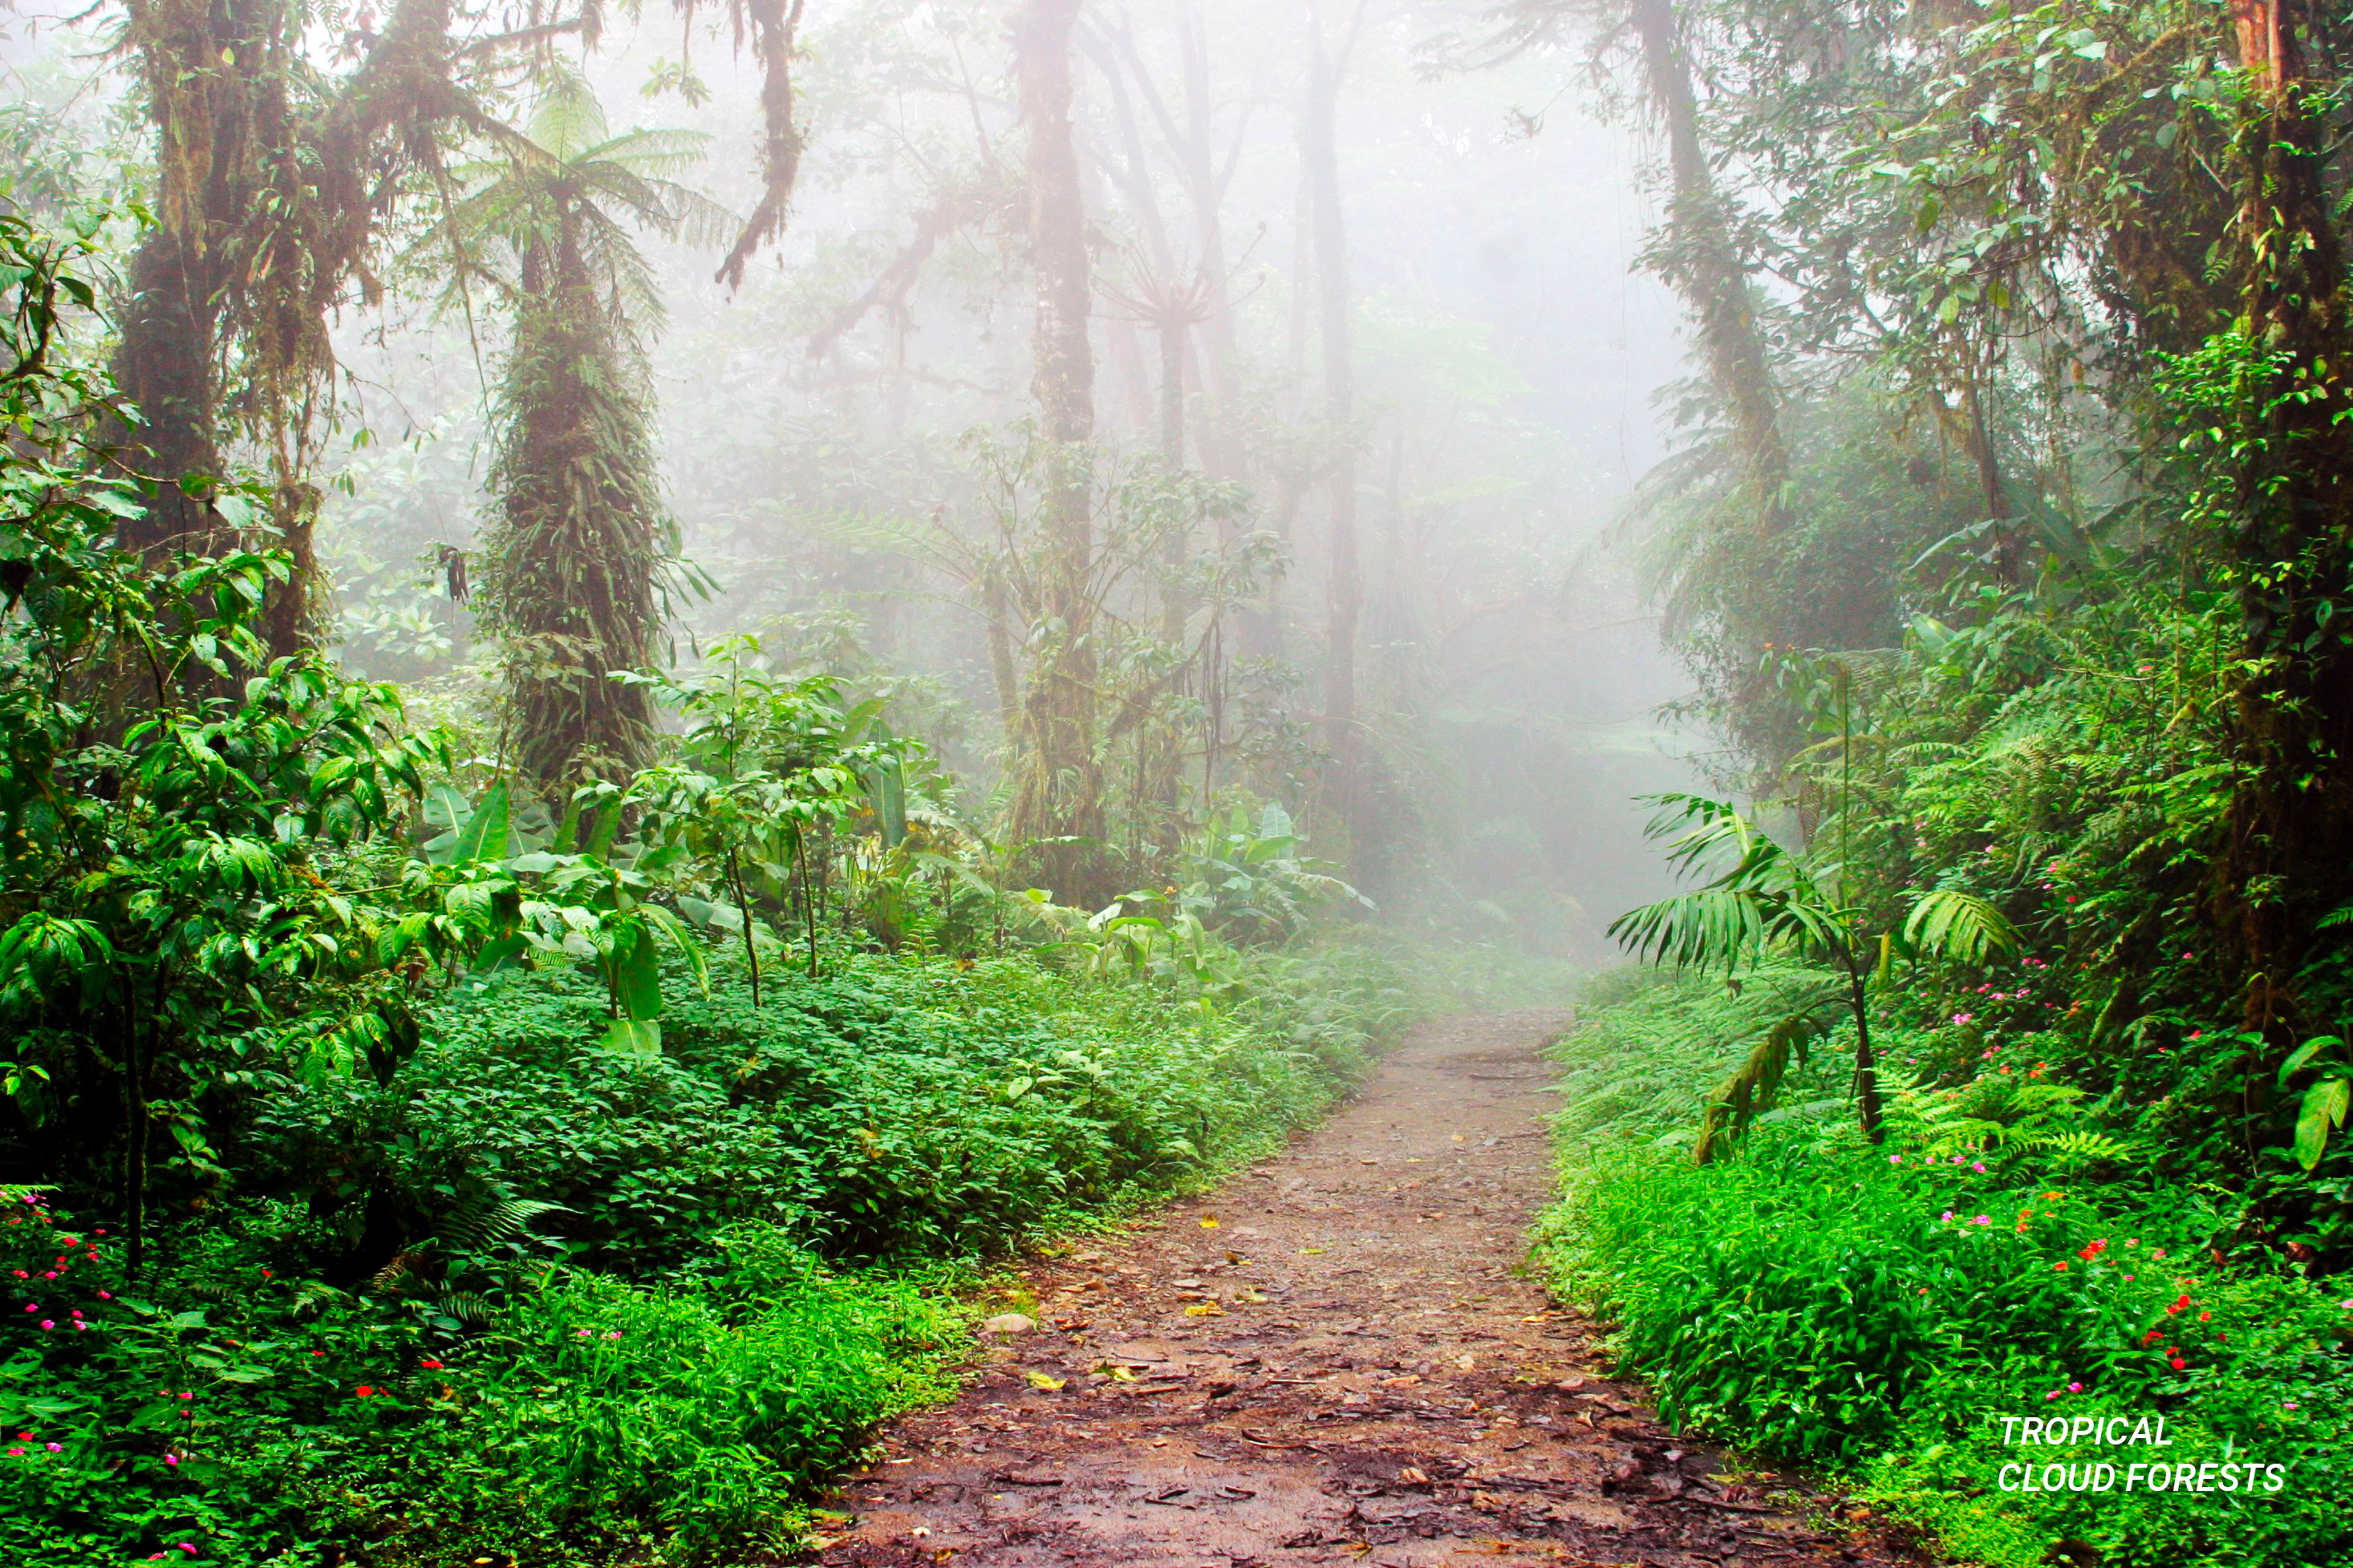 Cloudforests, Costa Rica climate and microclimates